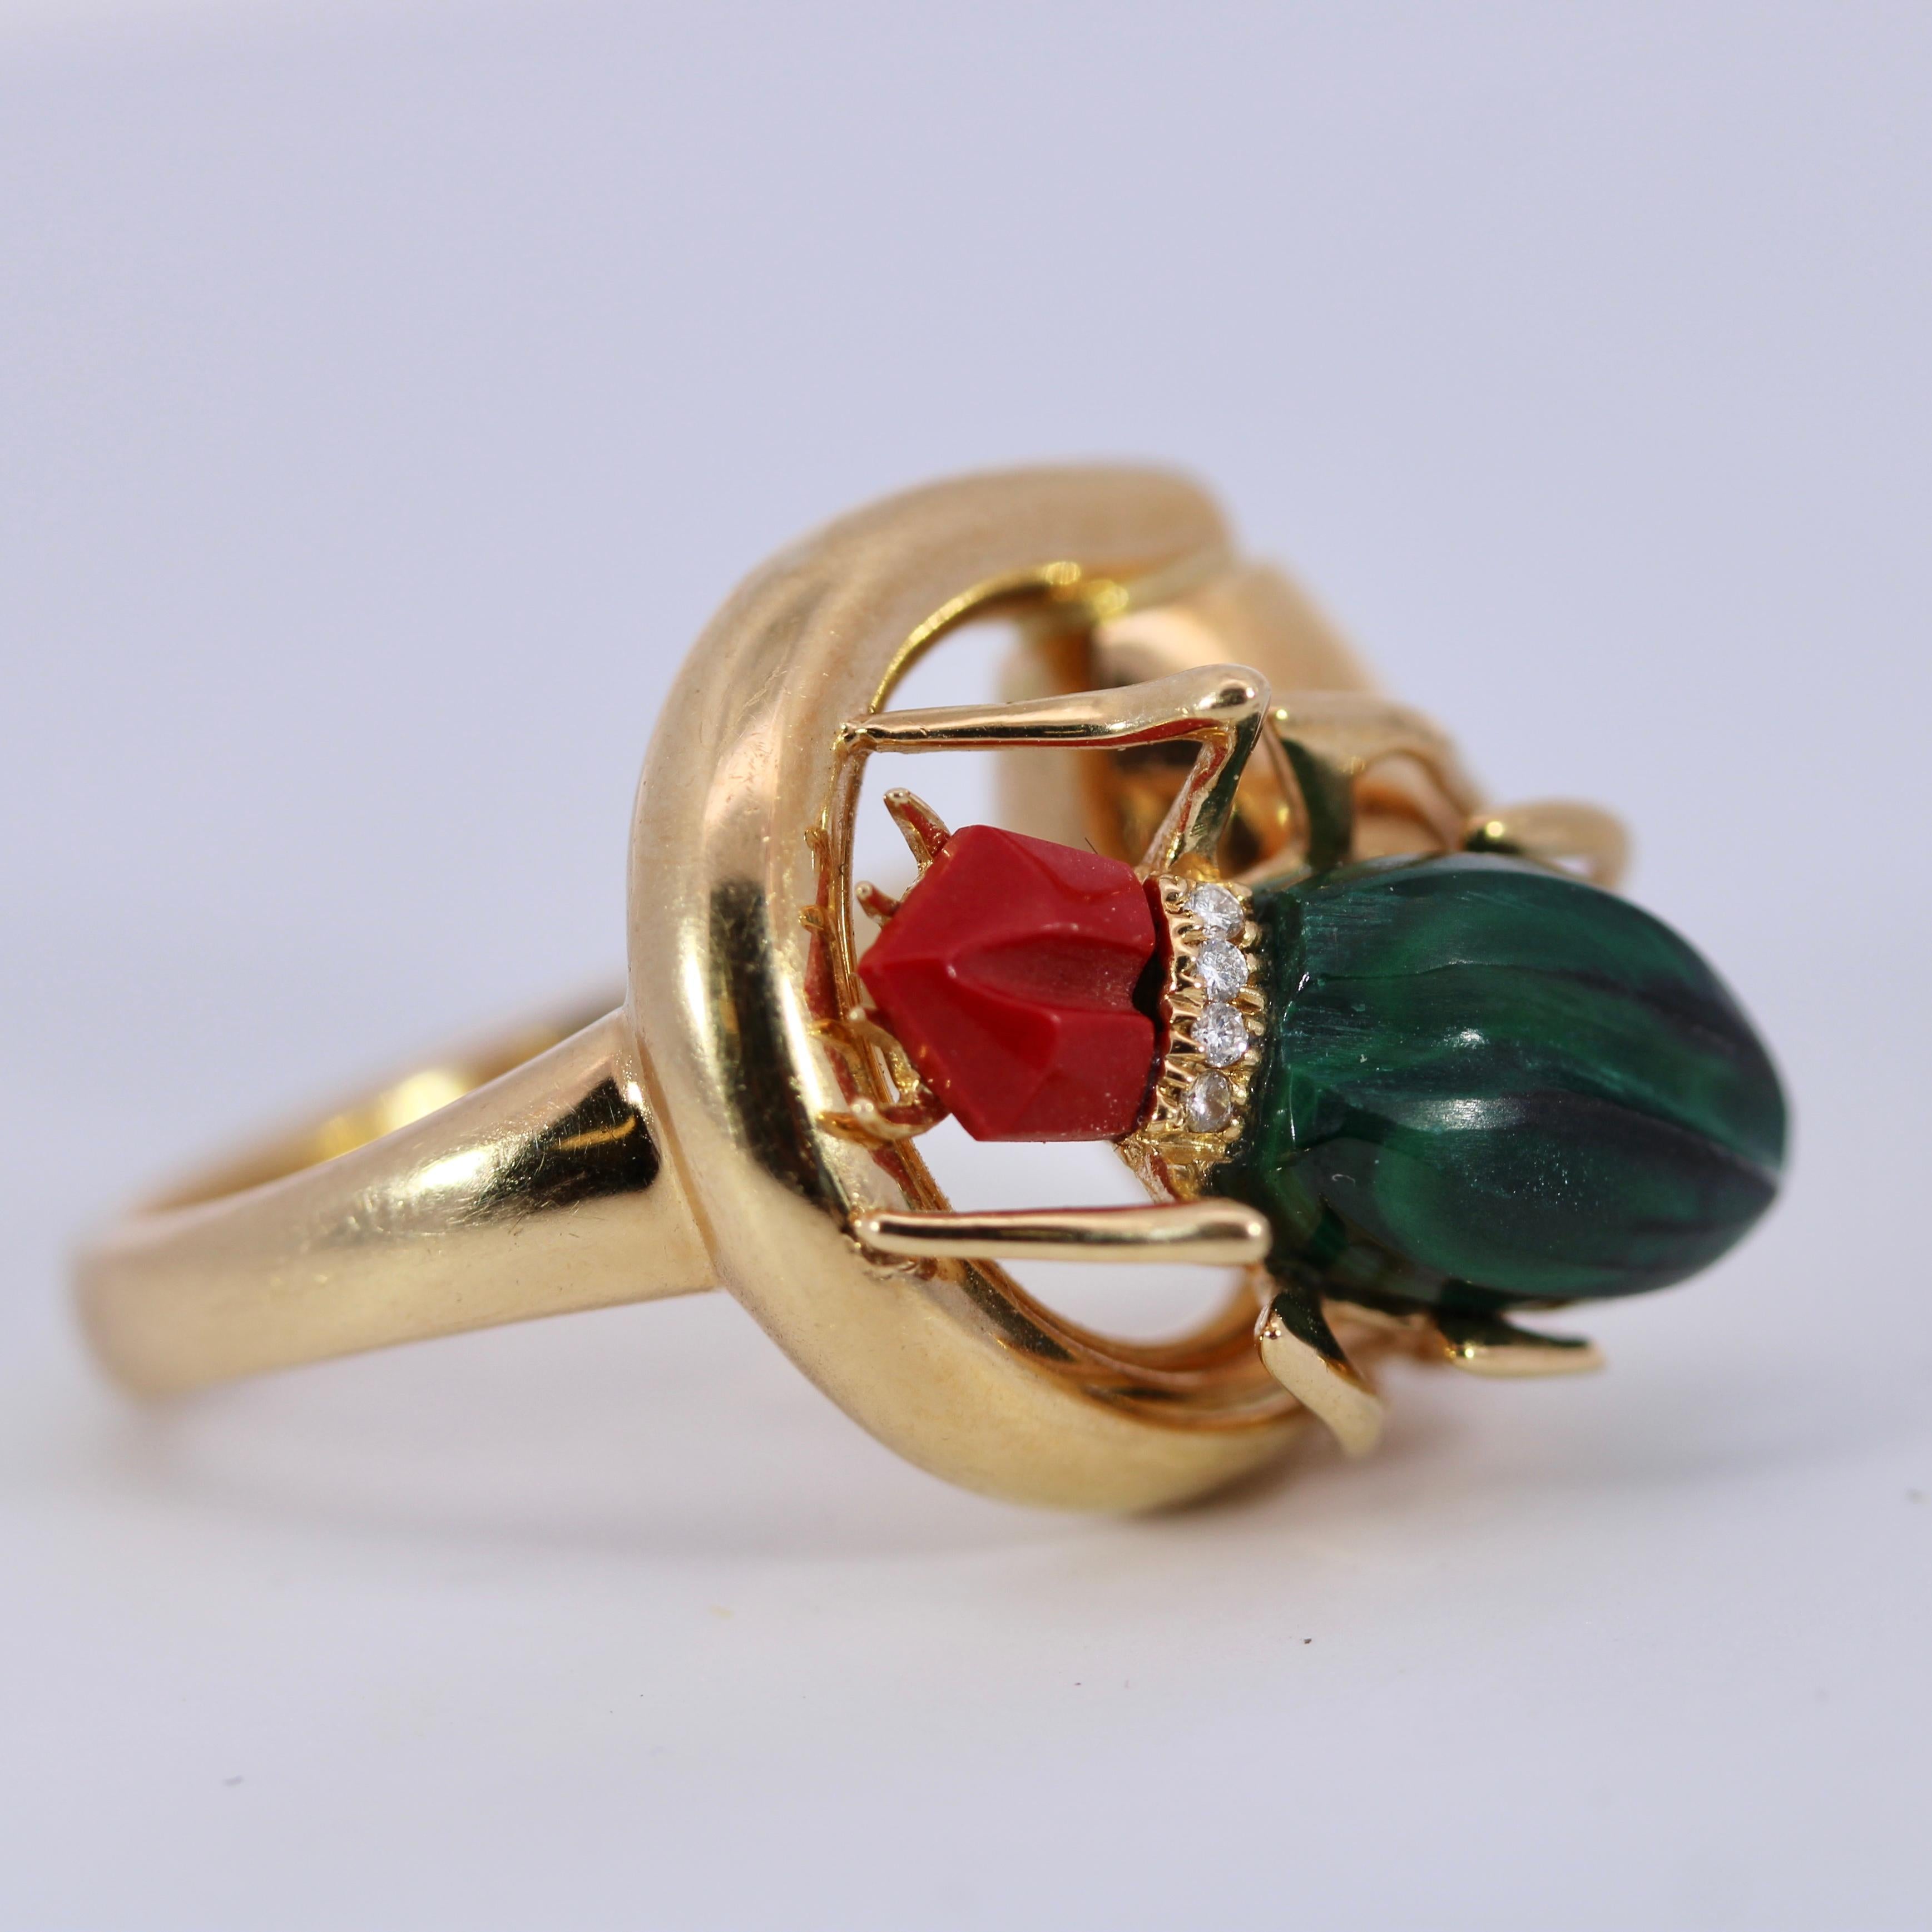 Gucci Milano 18K Yellow Gold Beetle Ring With Diamonds, Coral And Malachi For Sale 1